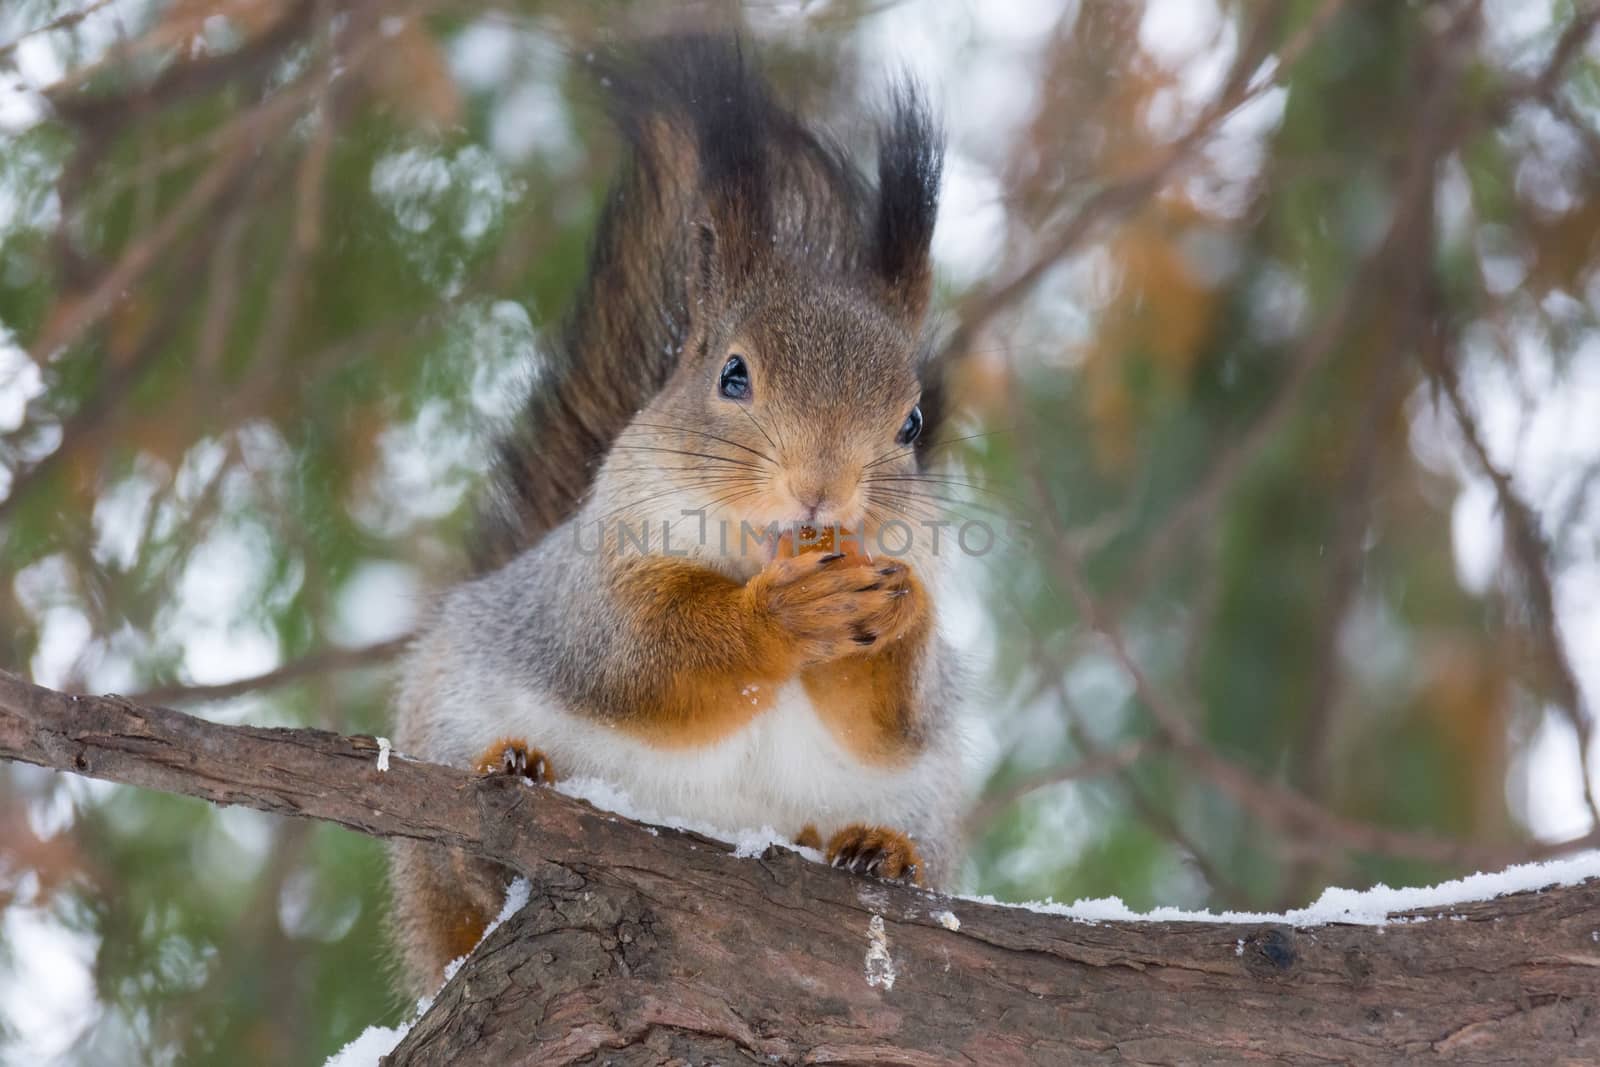 The photo shows a squirrel with a nut. Squirrel sits and eats a nut.